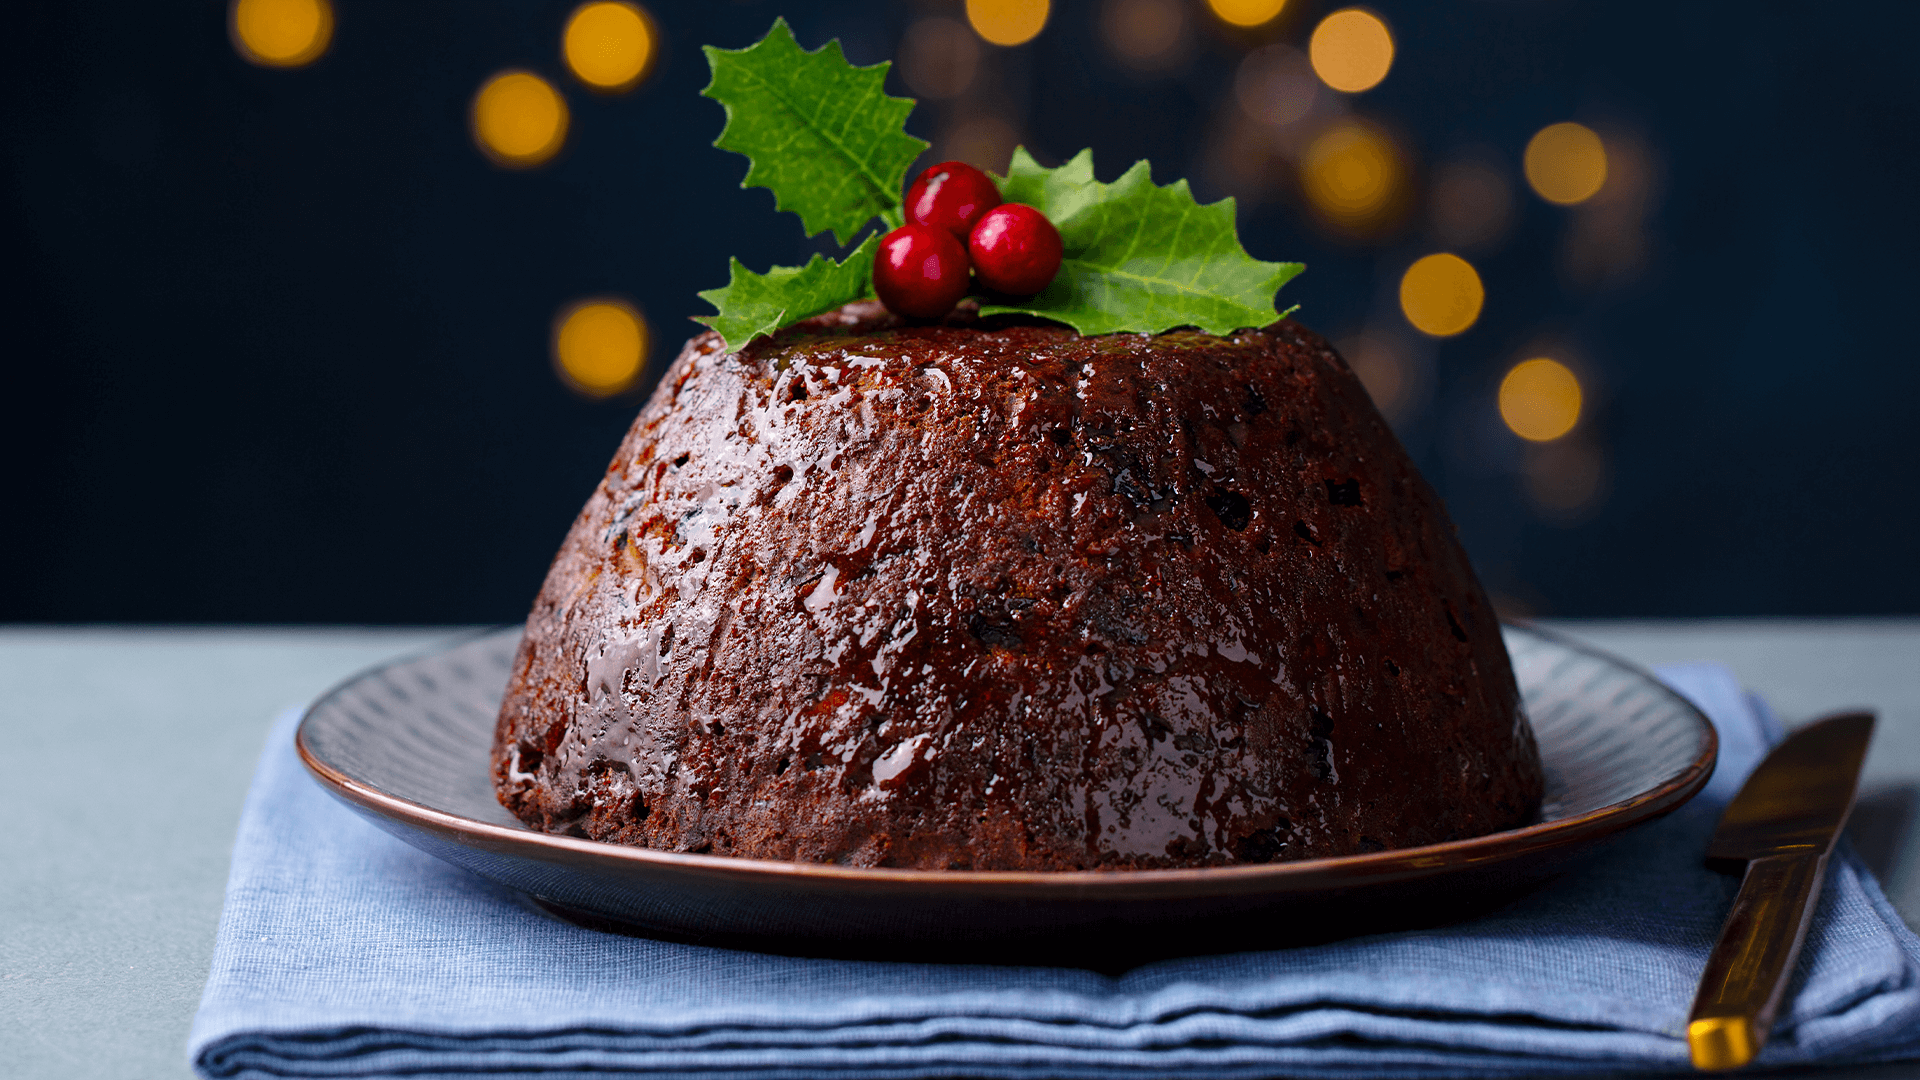 A christmas pudding sits on a dark plate on top of a blue folded napkin. Some holly foliage sits on top of the pudding, with bokeh effect lights behind on a black background.